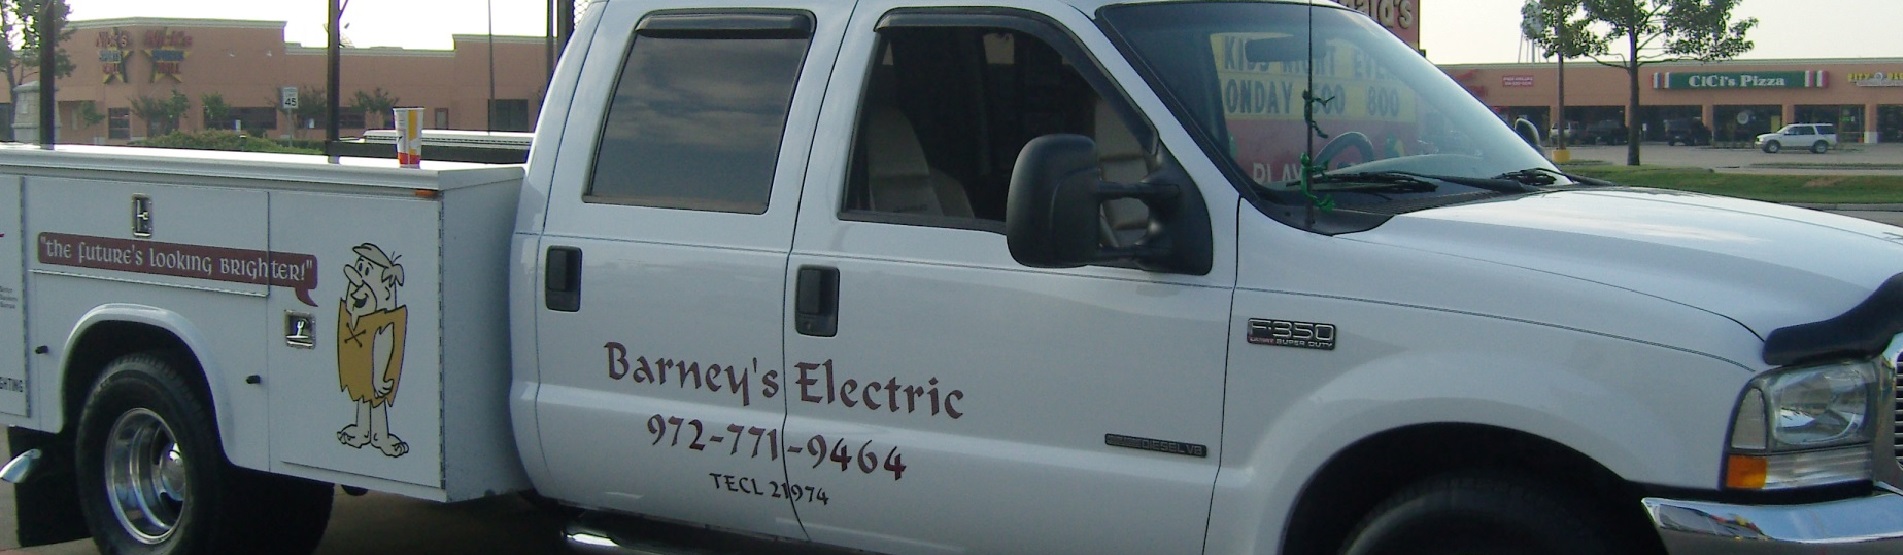 electrical contractor Rockwall texas Electrician Rockwall TX Barney's Electric Full Service Electrician Residential Commercial Retail and New Construction Wiring Repair Installation Service 24 Hour Emergency Services Master Electrician Rockwall Texas